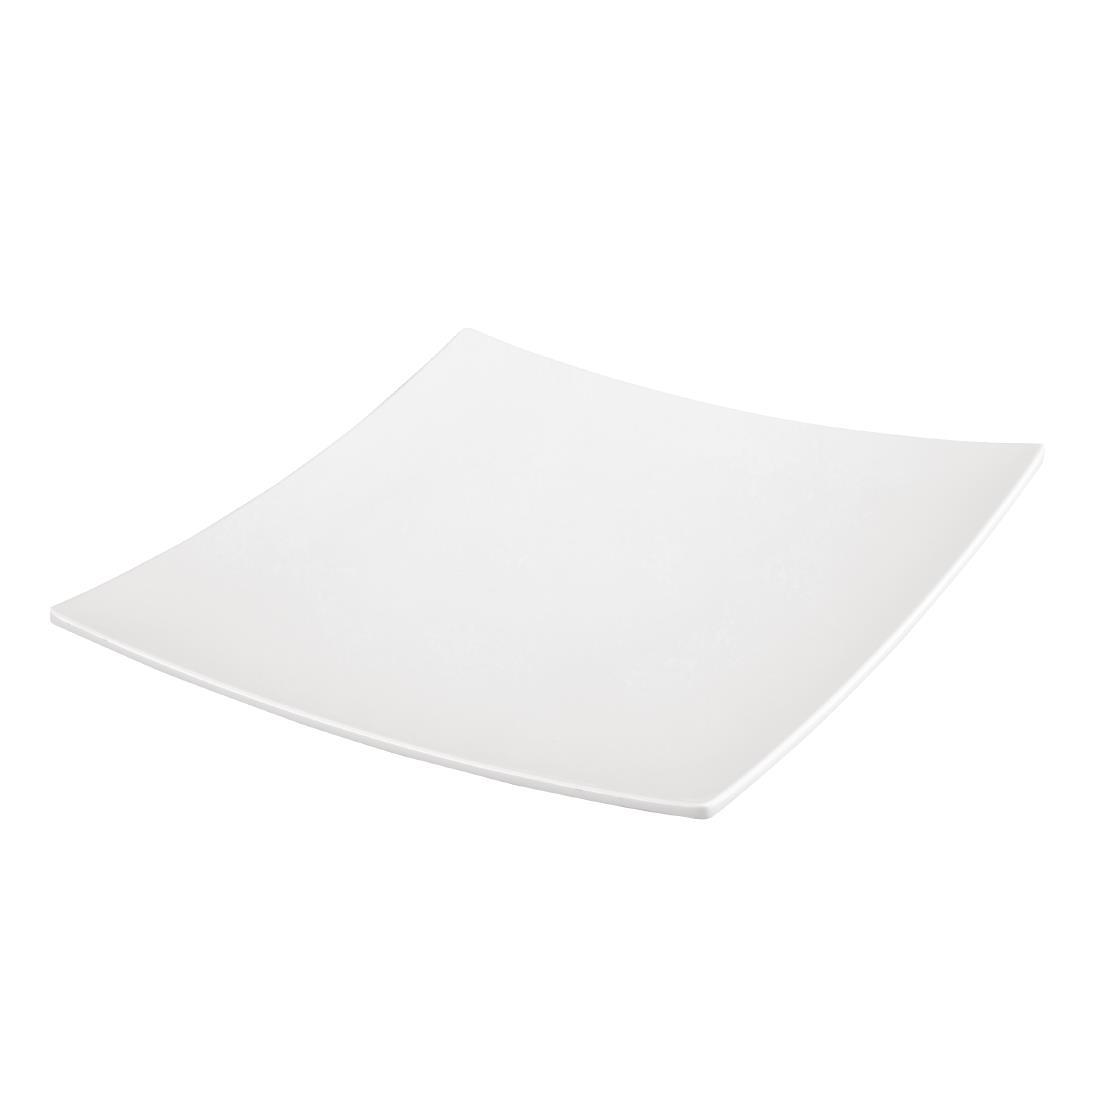 Olympia Kristallon Curved Square Melamine Plate White 300mm - DP140  - 1